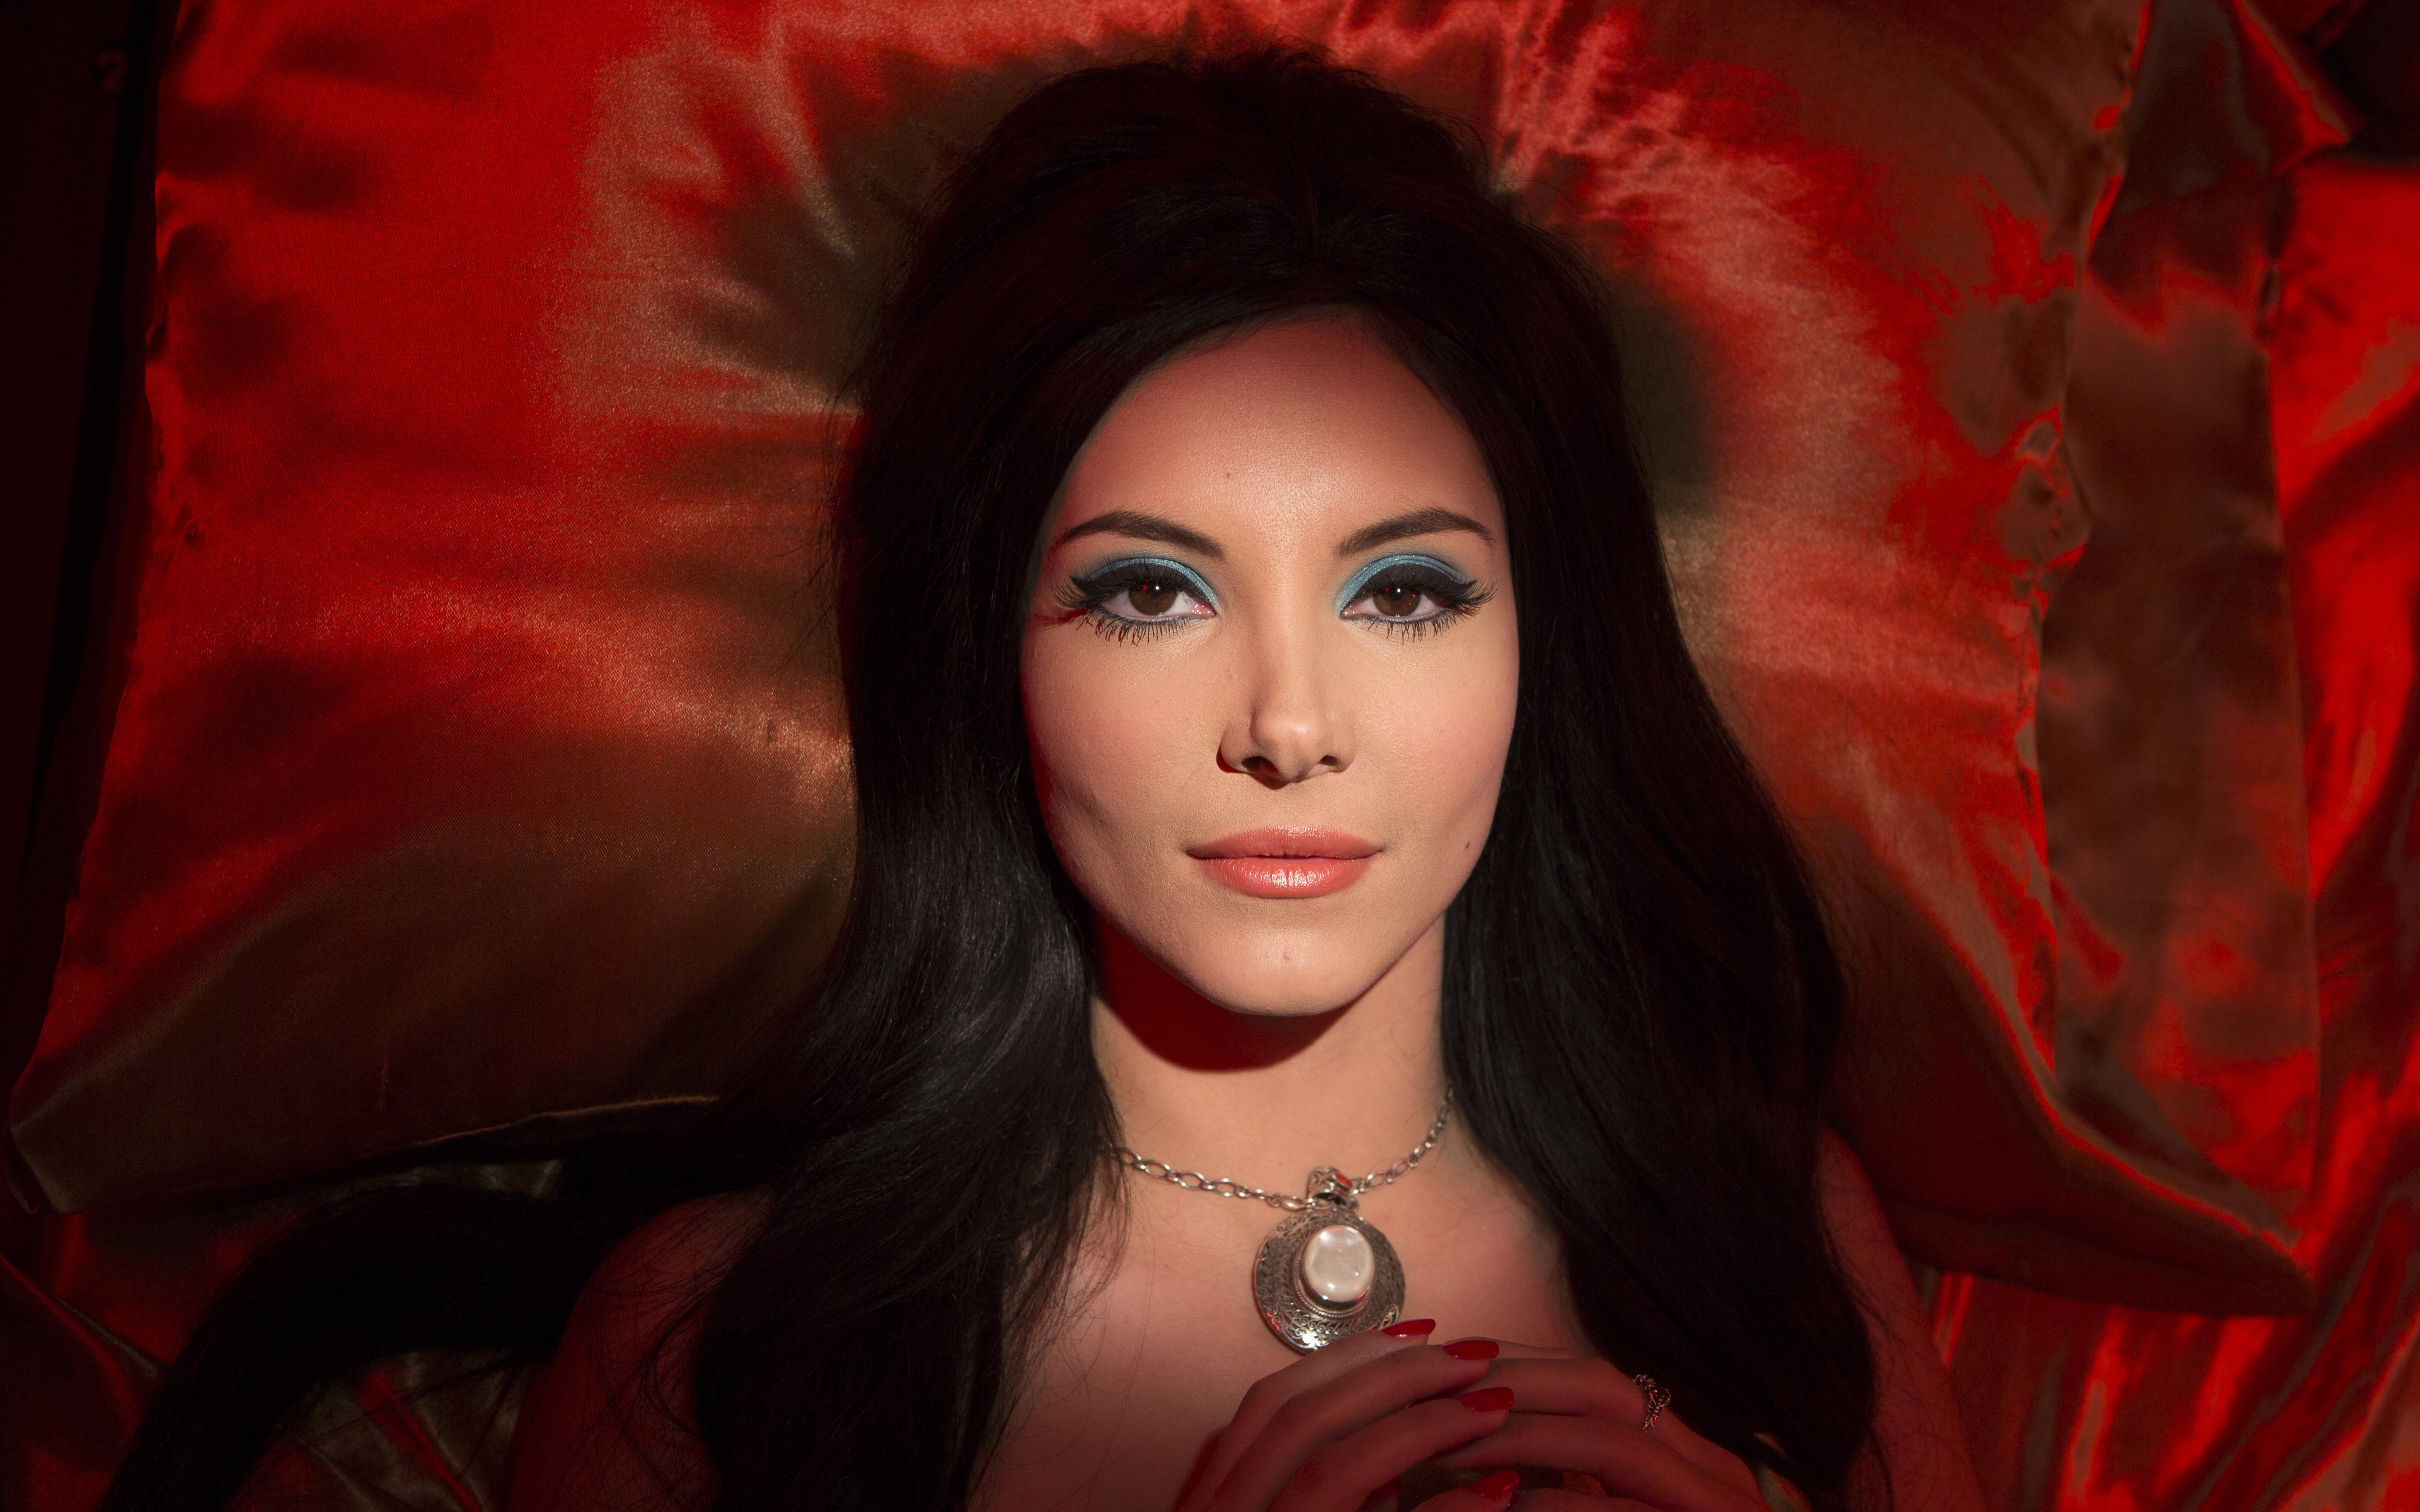 The Love Witch In 3840x2400 Resolution. the-love-witch-qhd.jpg. 